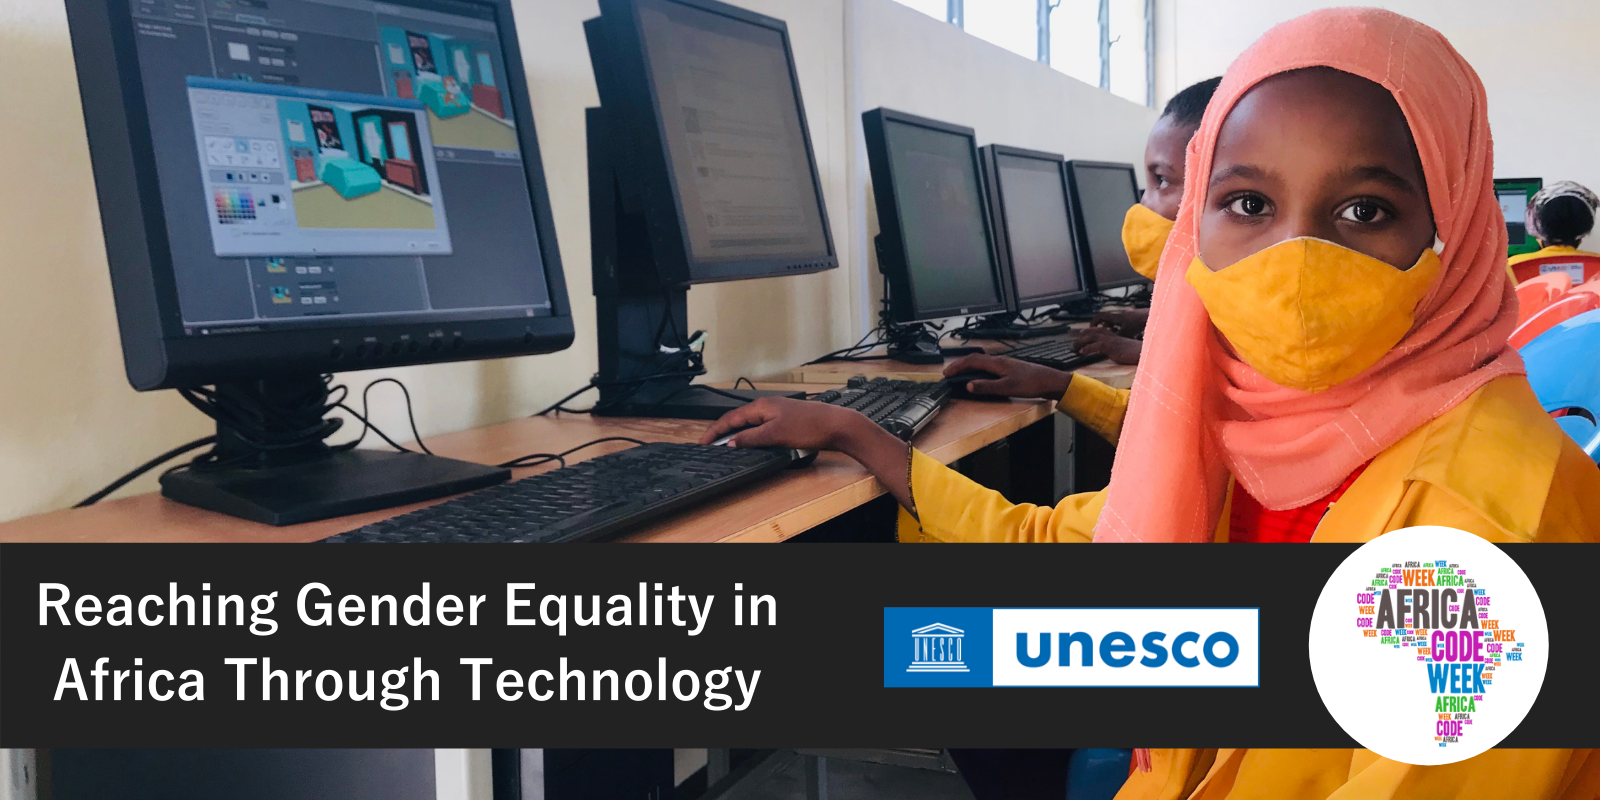 UNESCO And Africa Code Week Fast-Track Gender Equality Creatively In The Digital World